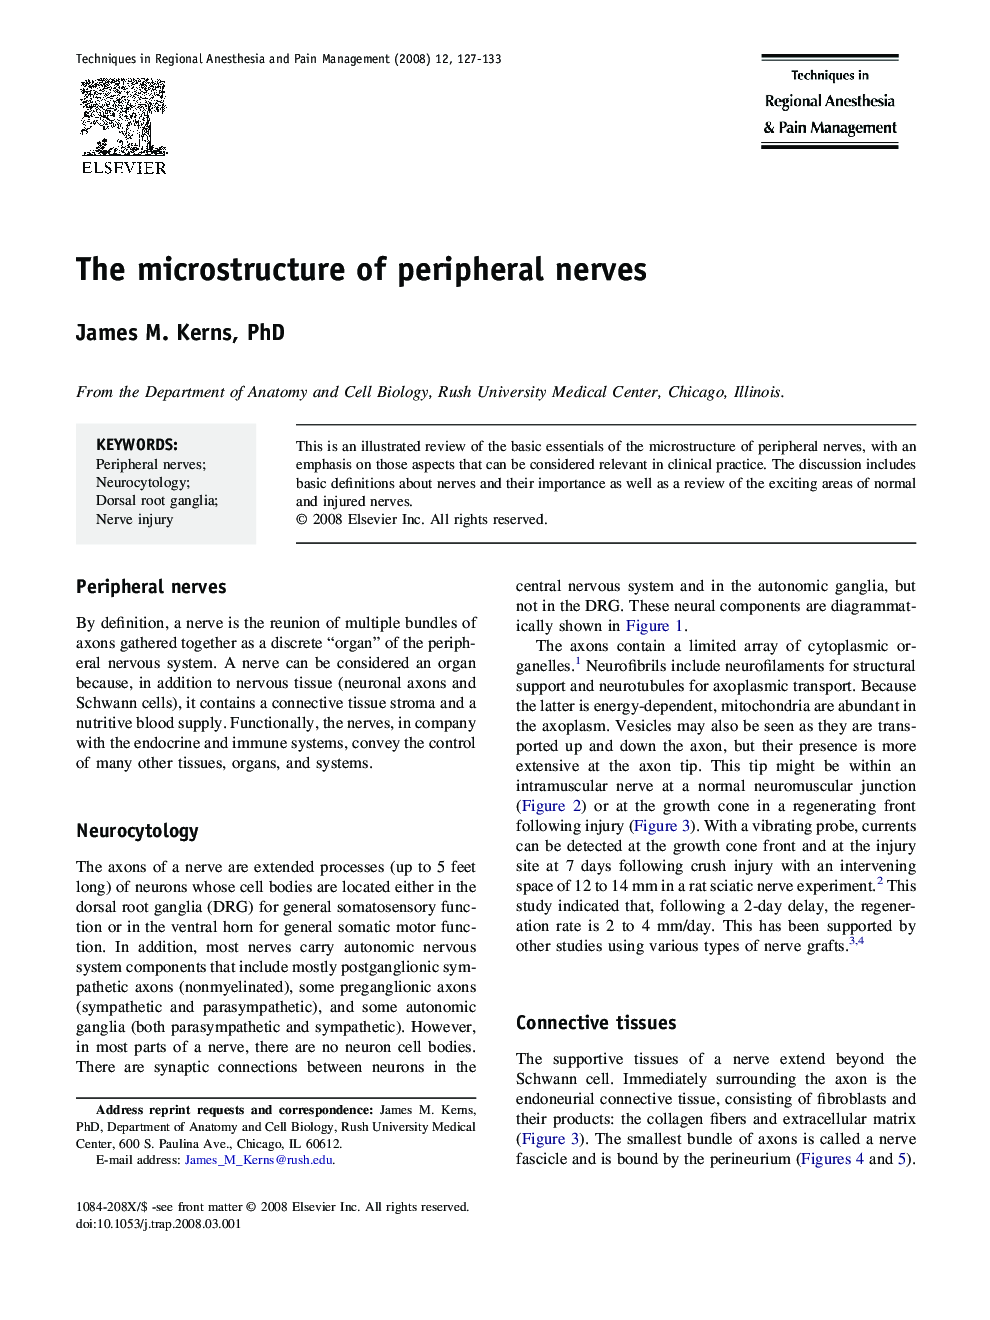 The microstructure of peripheral nerves